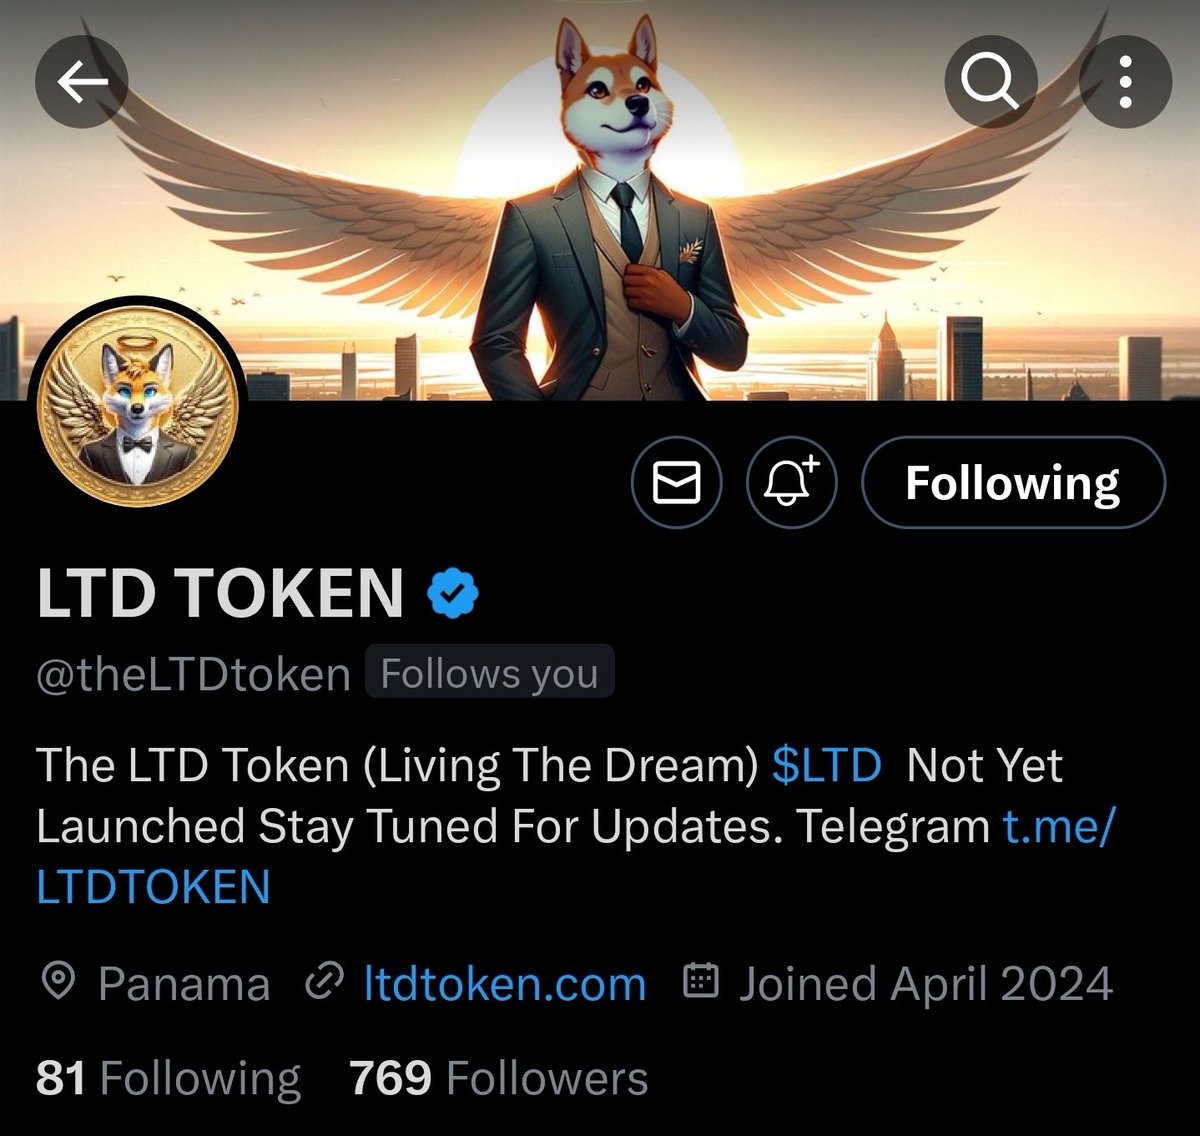 The @theLTDtoken account is growing sooooooooo fast. Whos going to hit 900 followers first
---Me or $LTD---
#LivingTheDream #ShibDreamNFTs